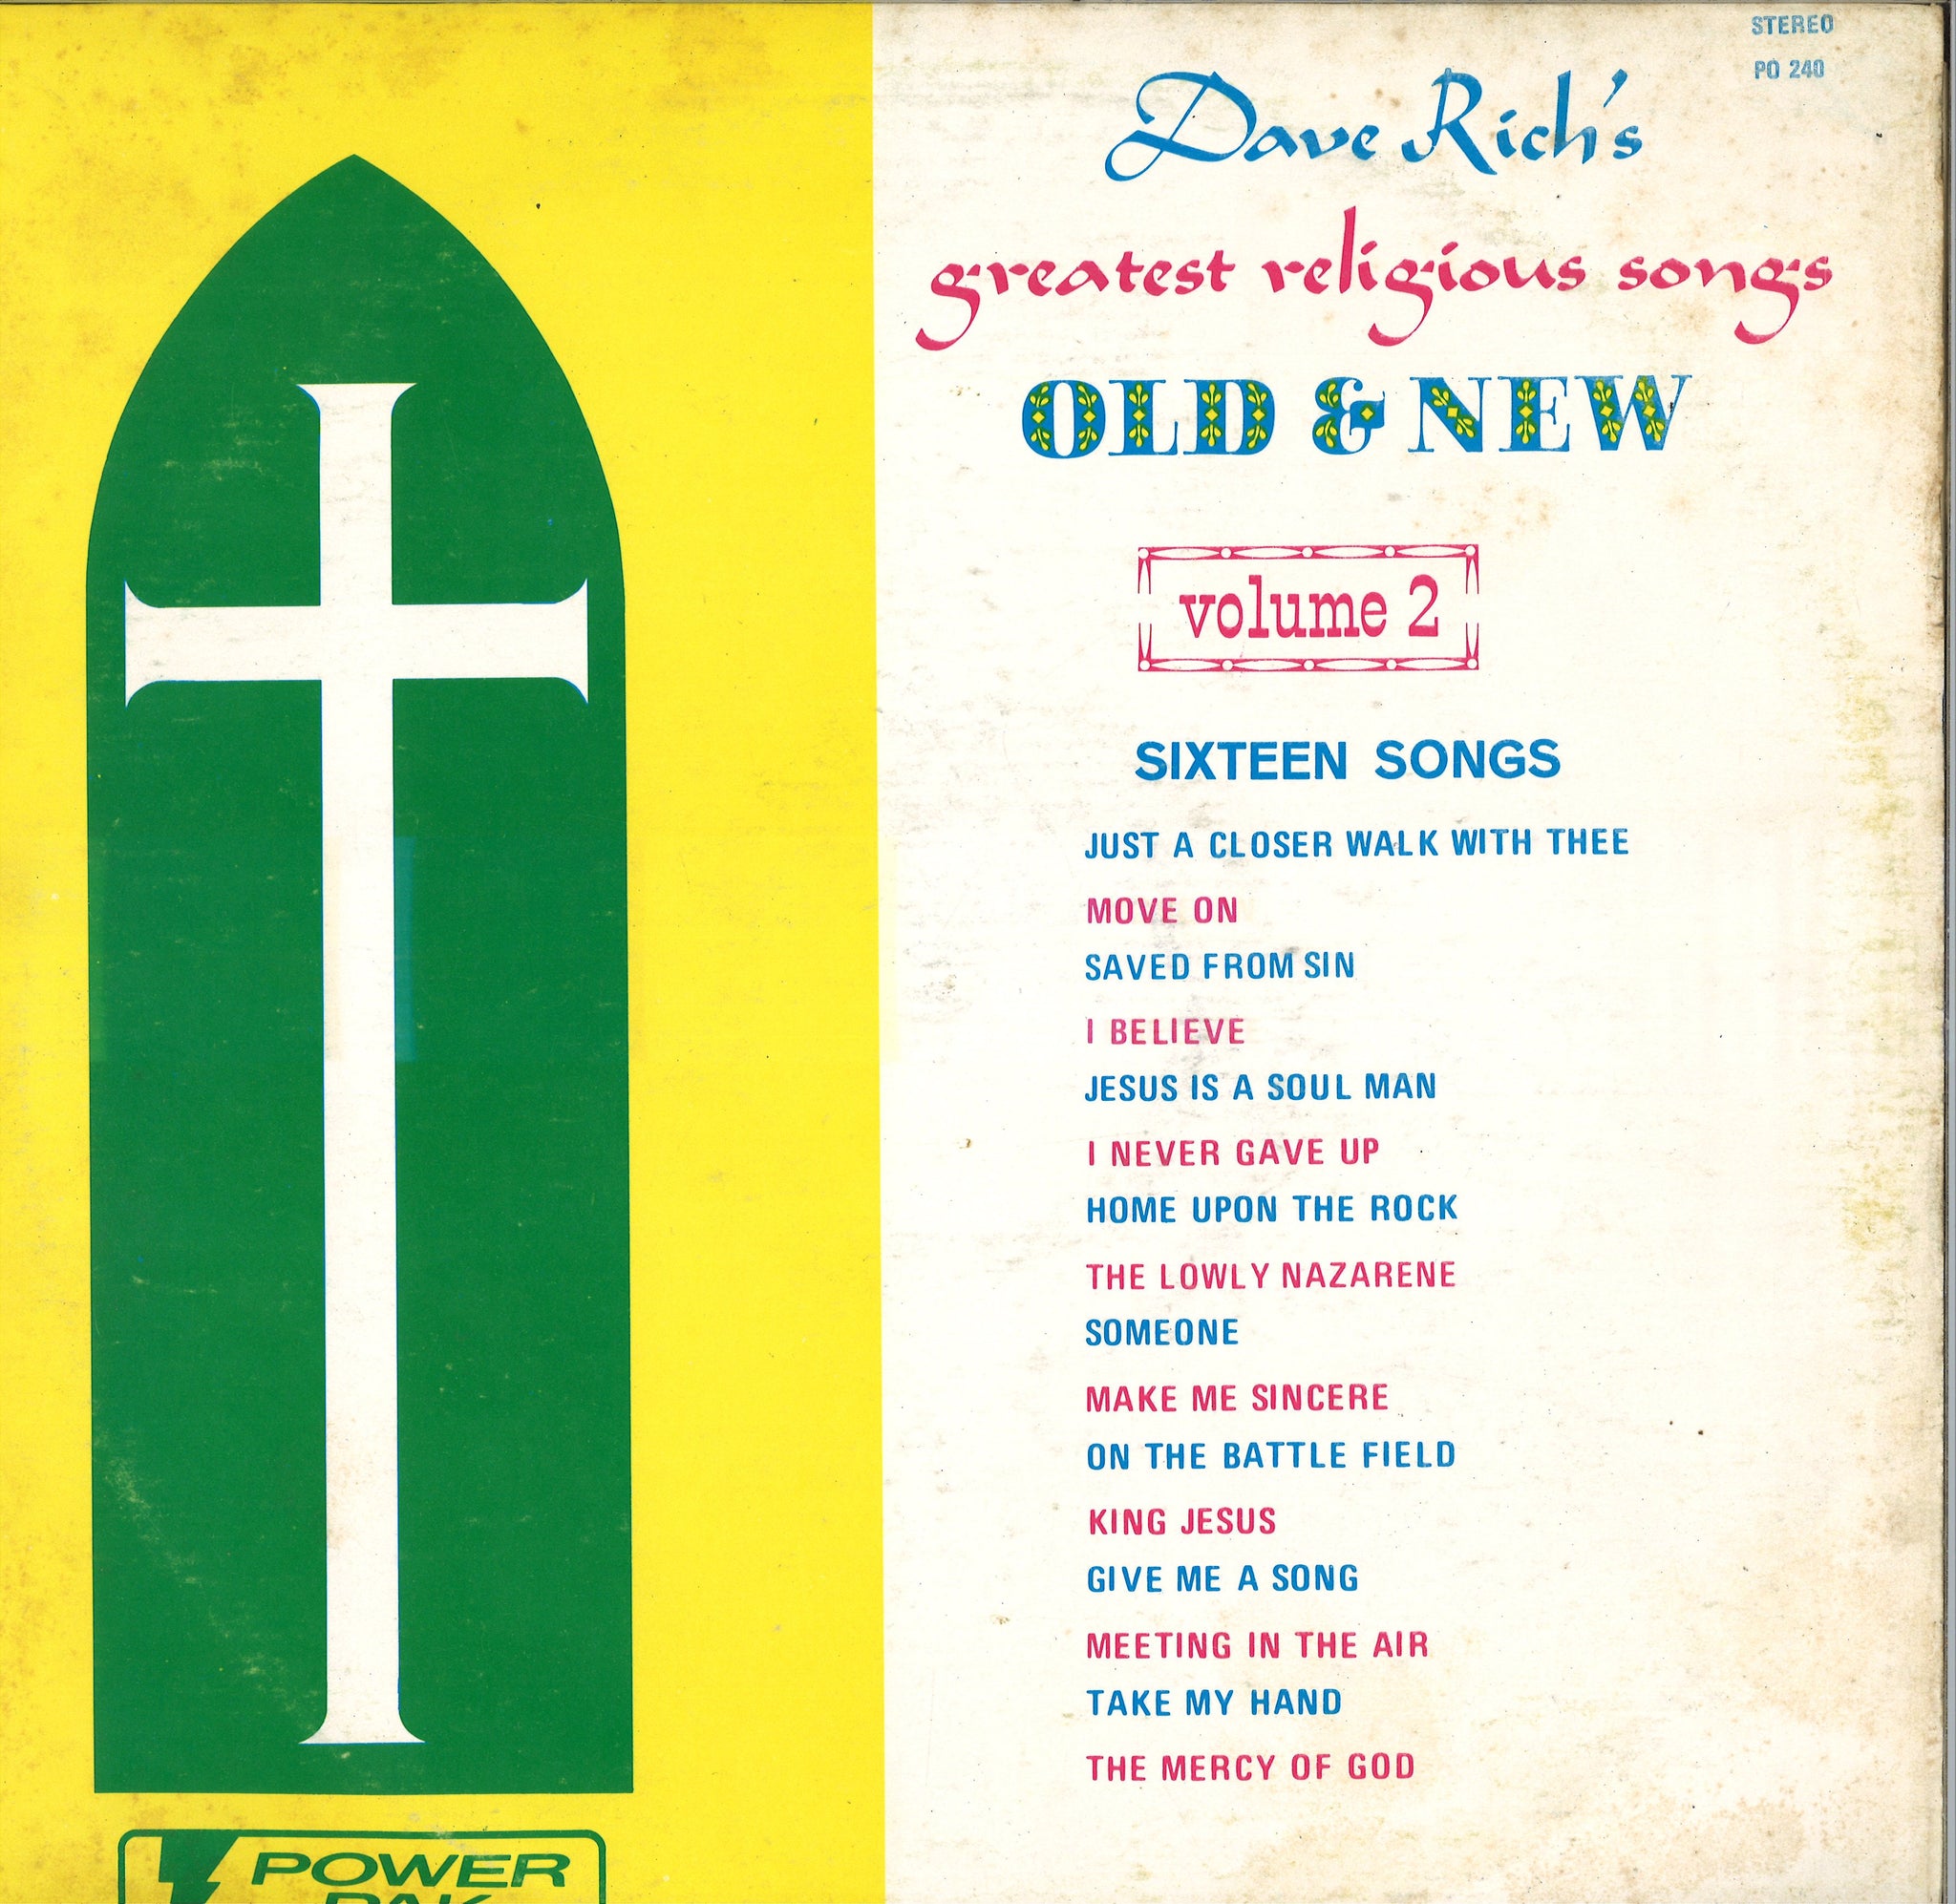 Dave Rich's Greatest Religious Songs Old & New Volume 2